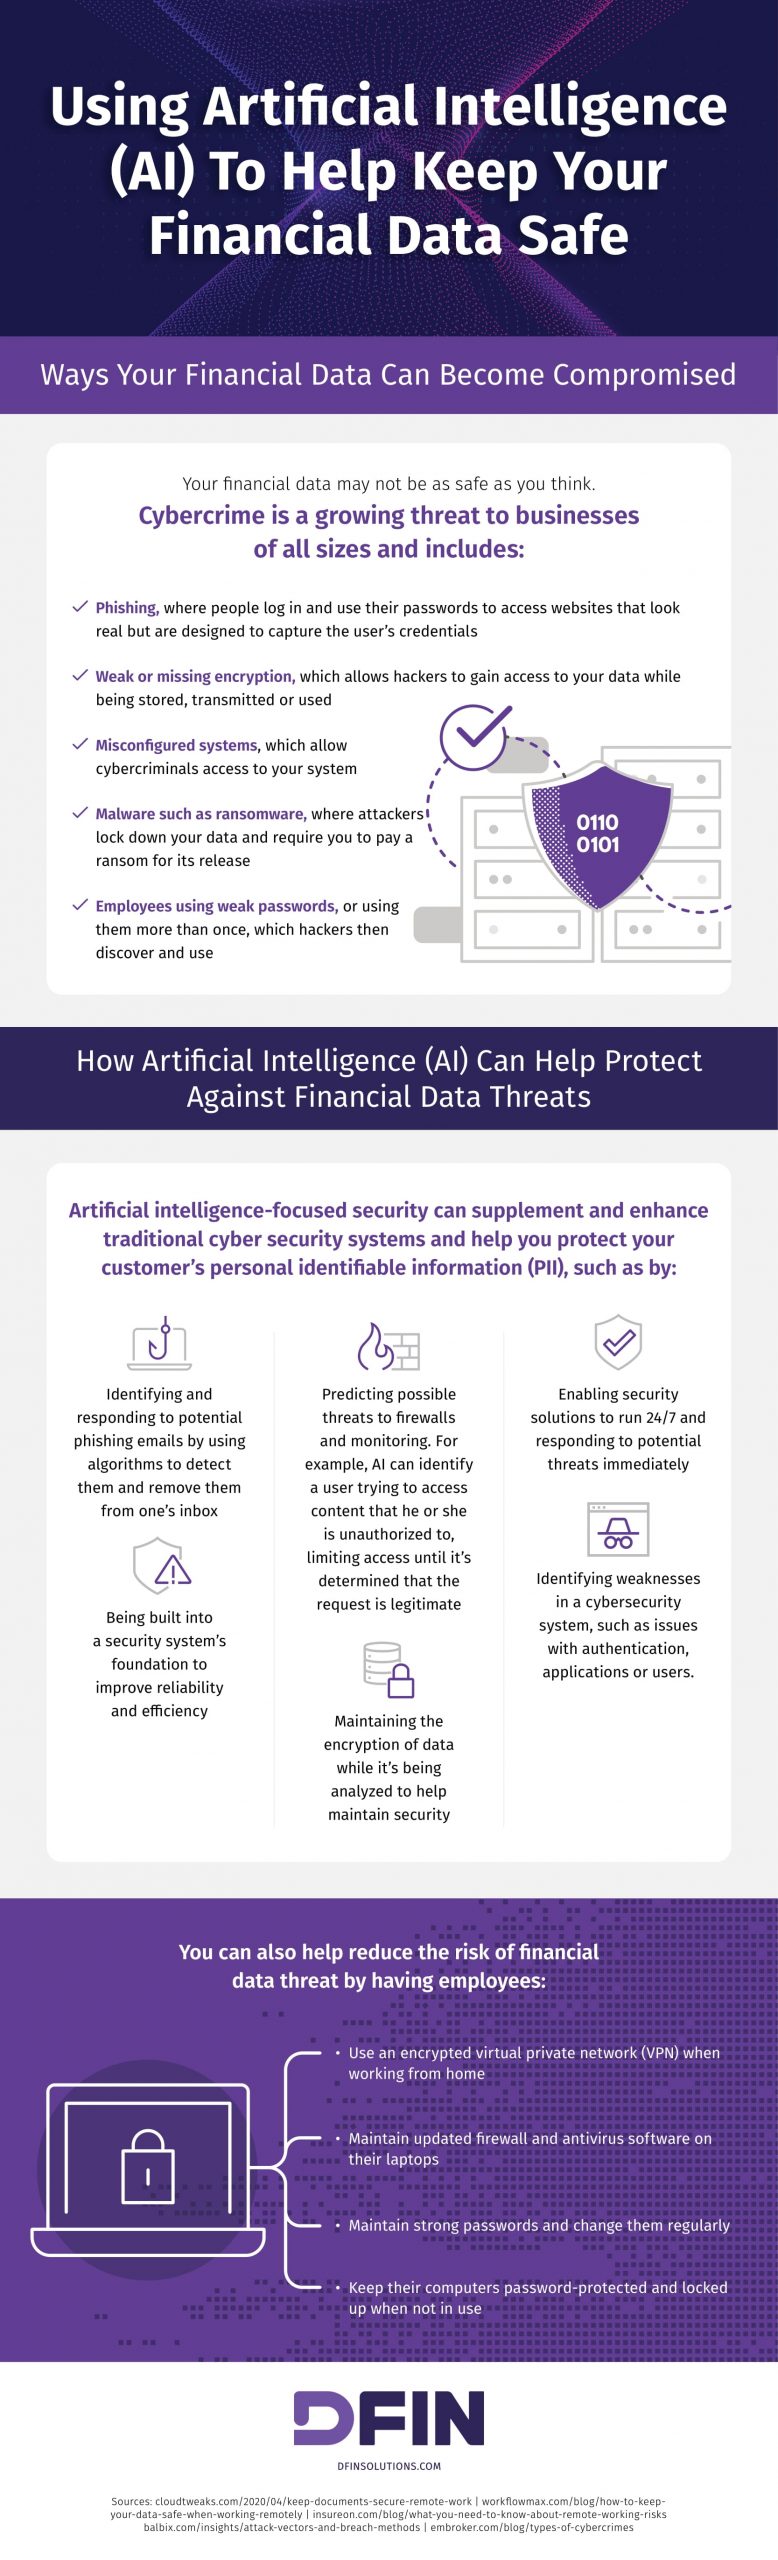 Using AI To Help Keep Your Financial Data Safe 1